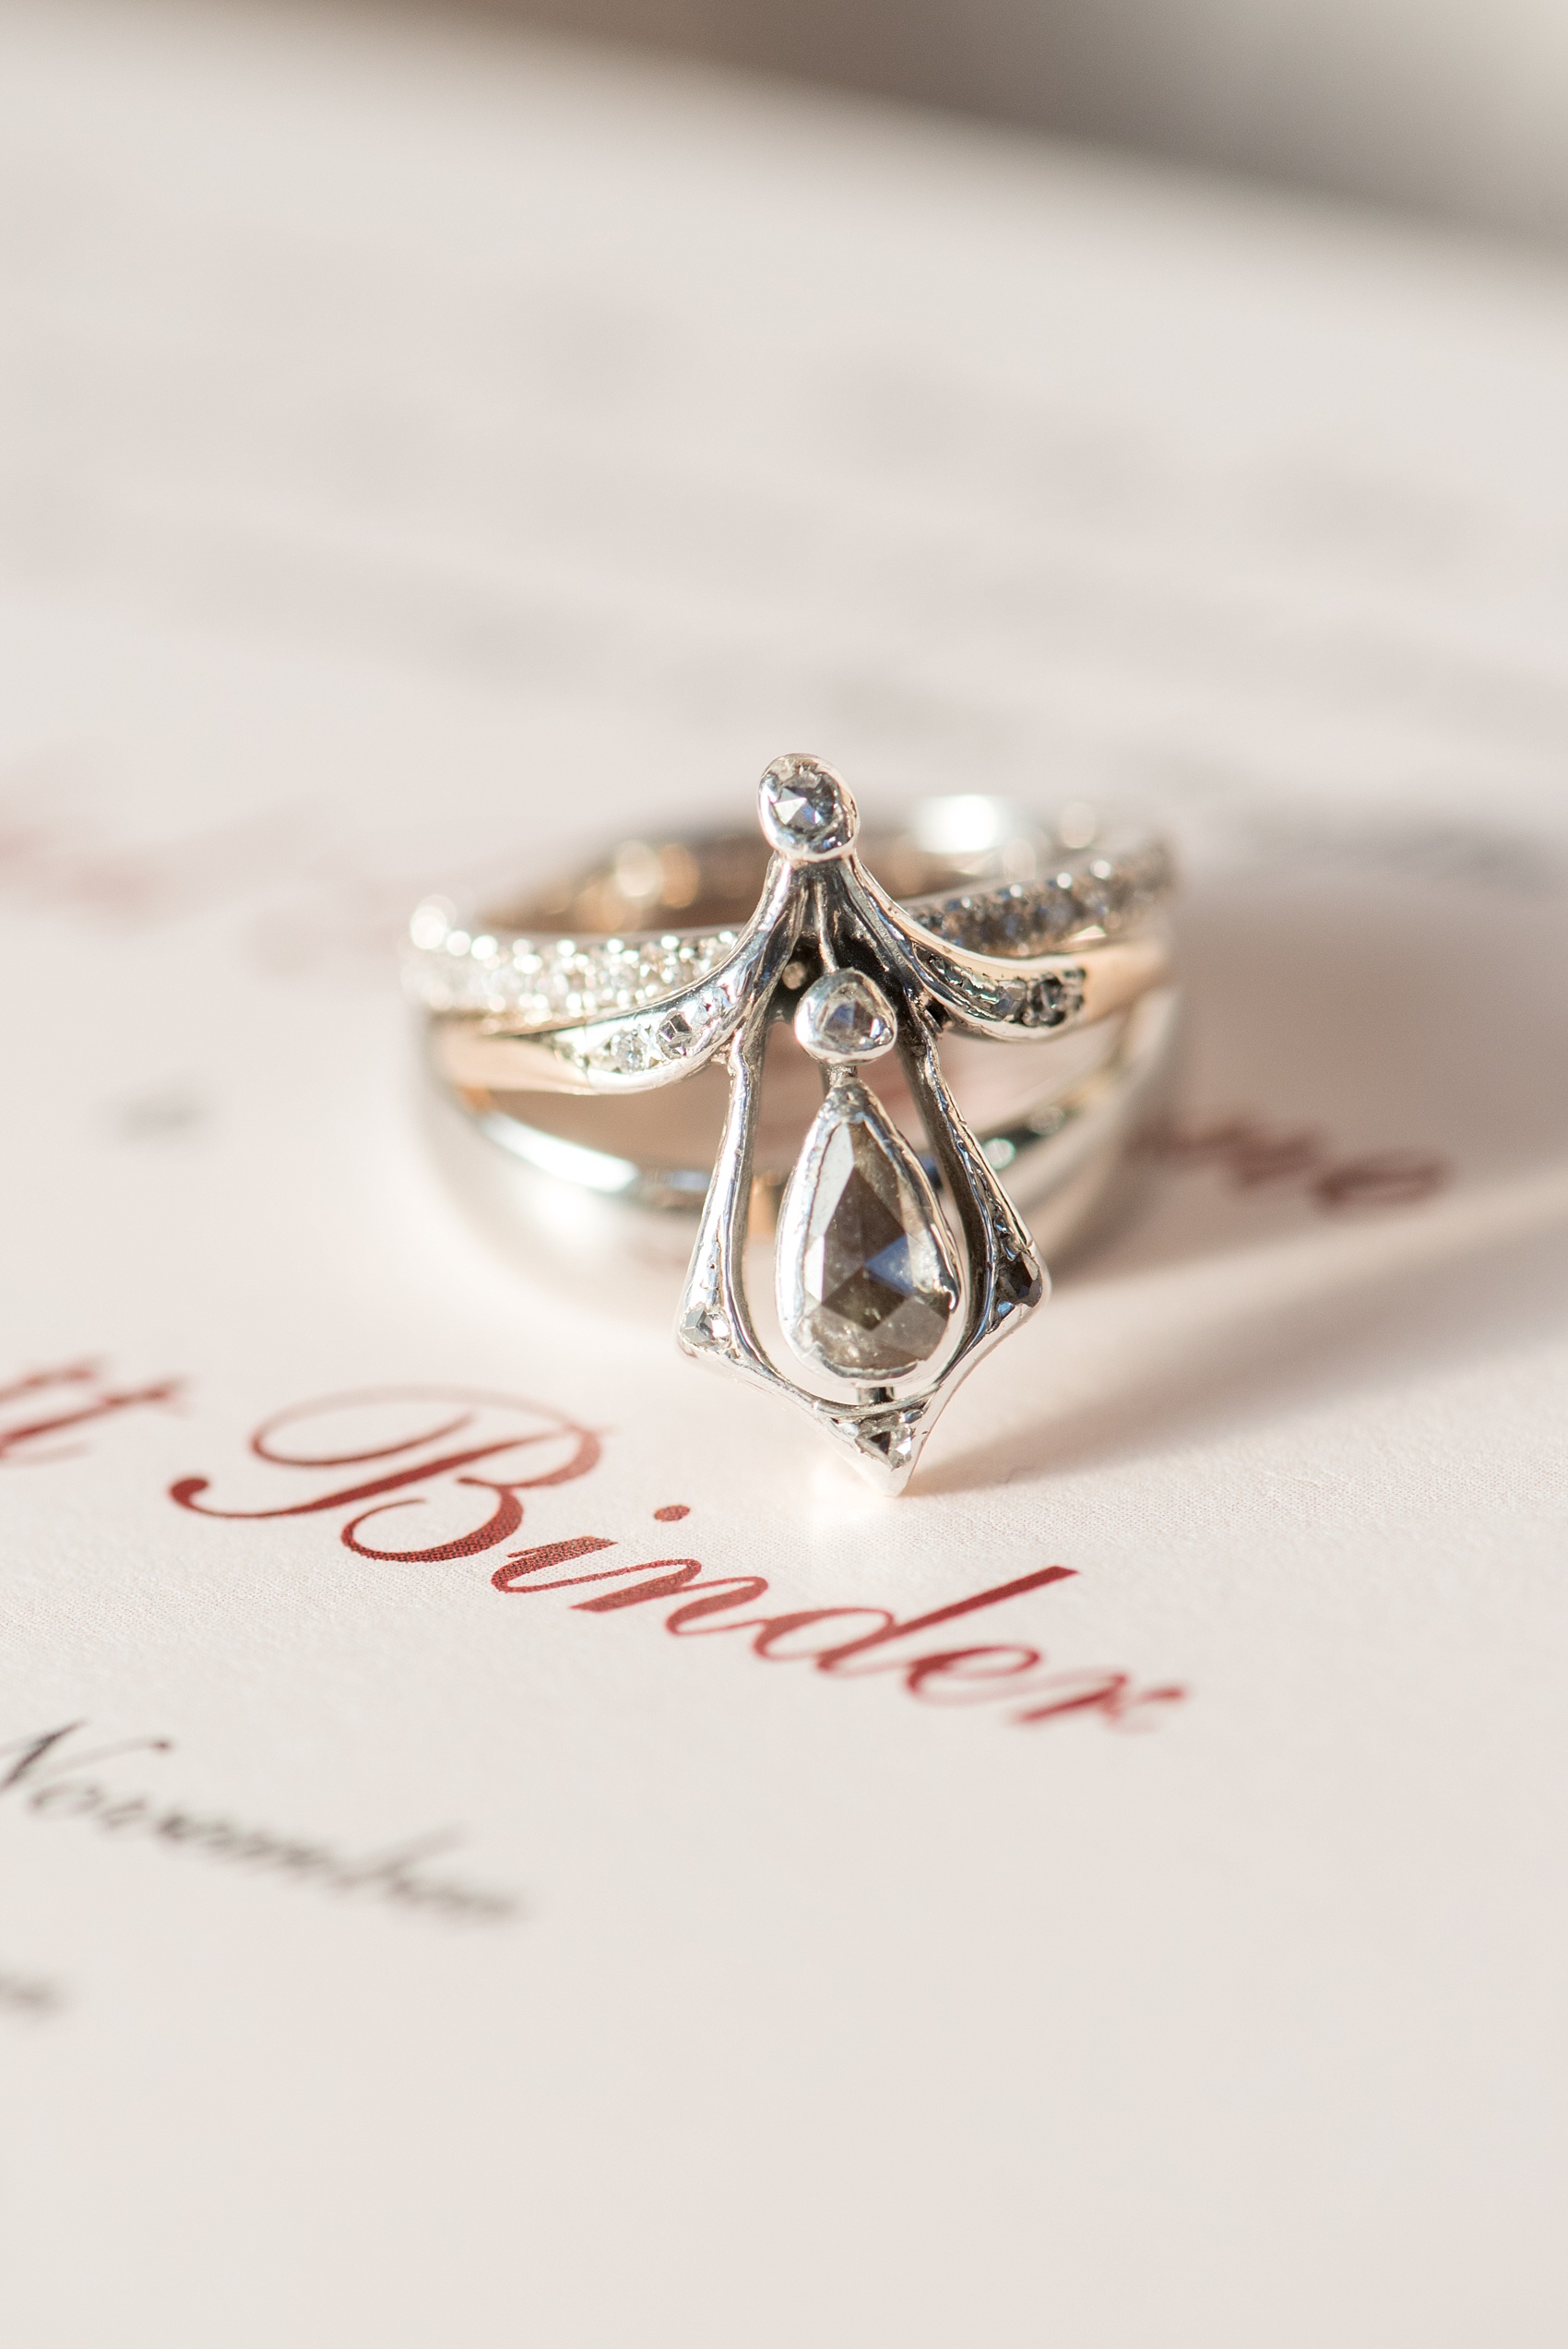 Mikkel Paige Photography photo of a wedding at The Rickhouse, Durham. A detail image of the bride and grooms wedding bands and a unique heirloom engagement ring with teardrop/diamond detail.